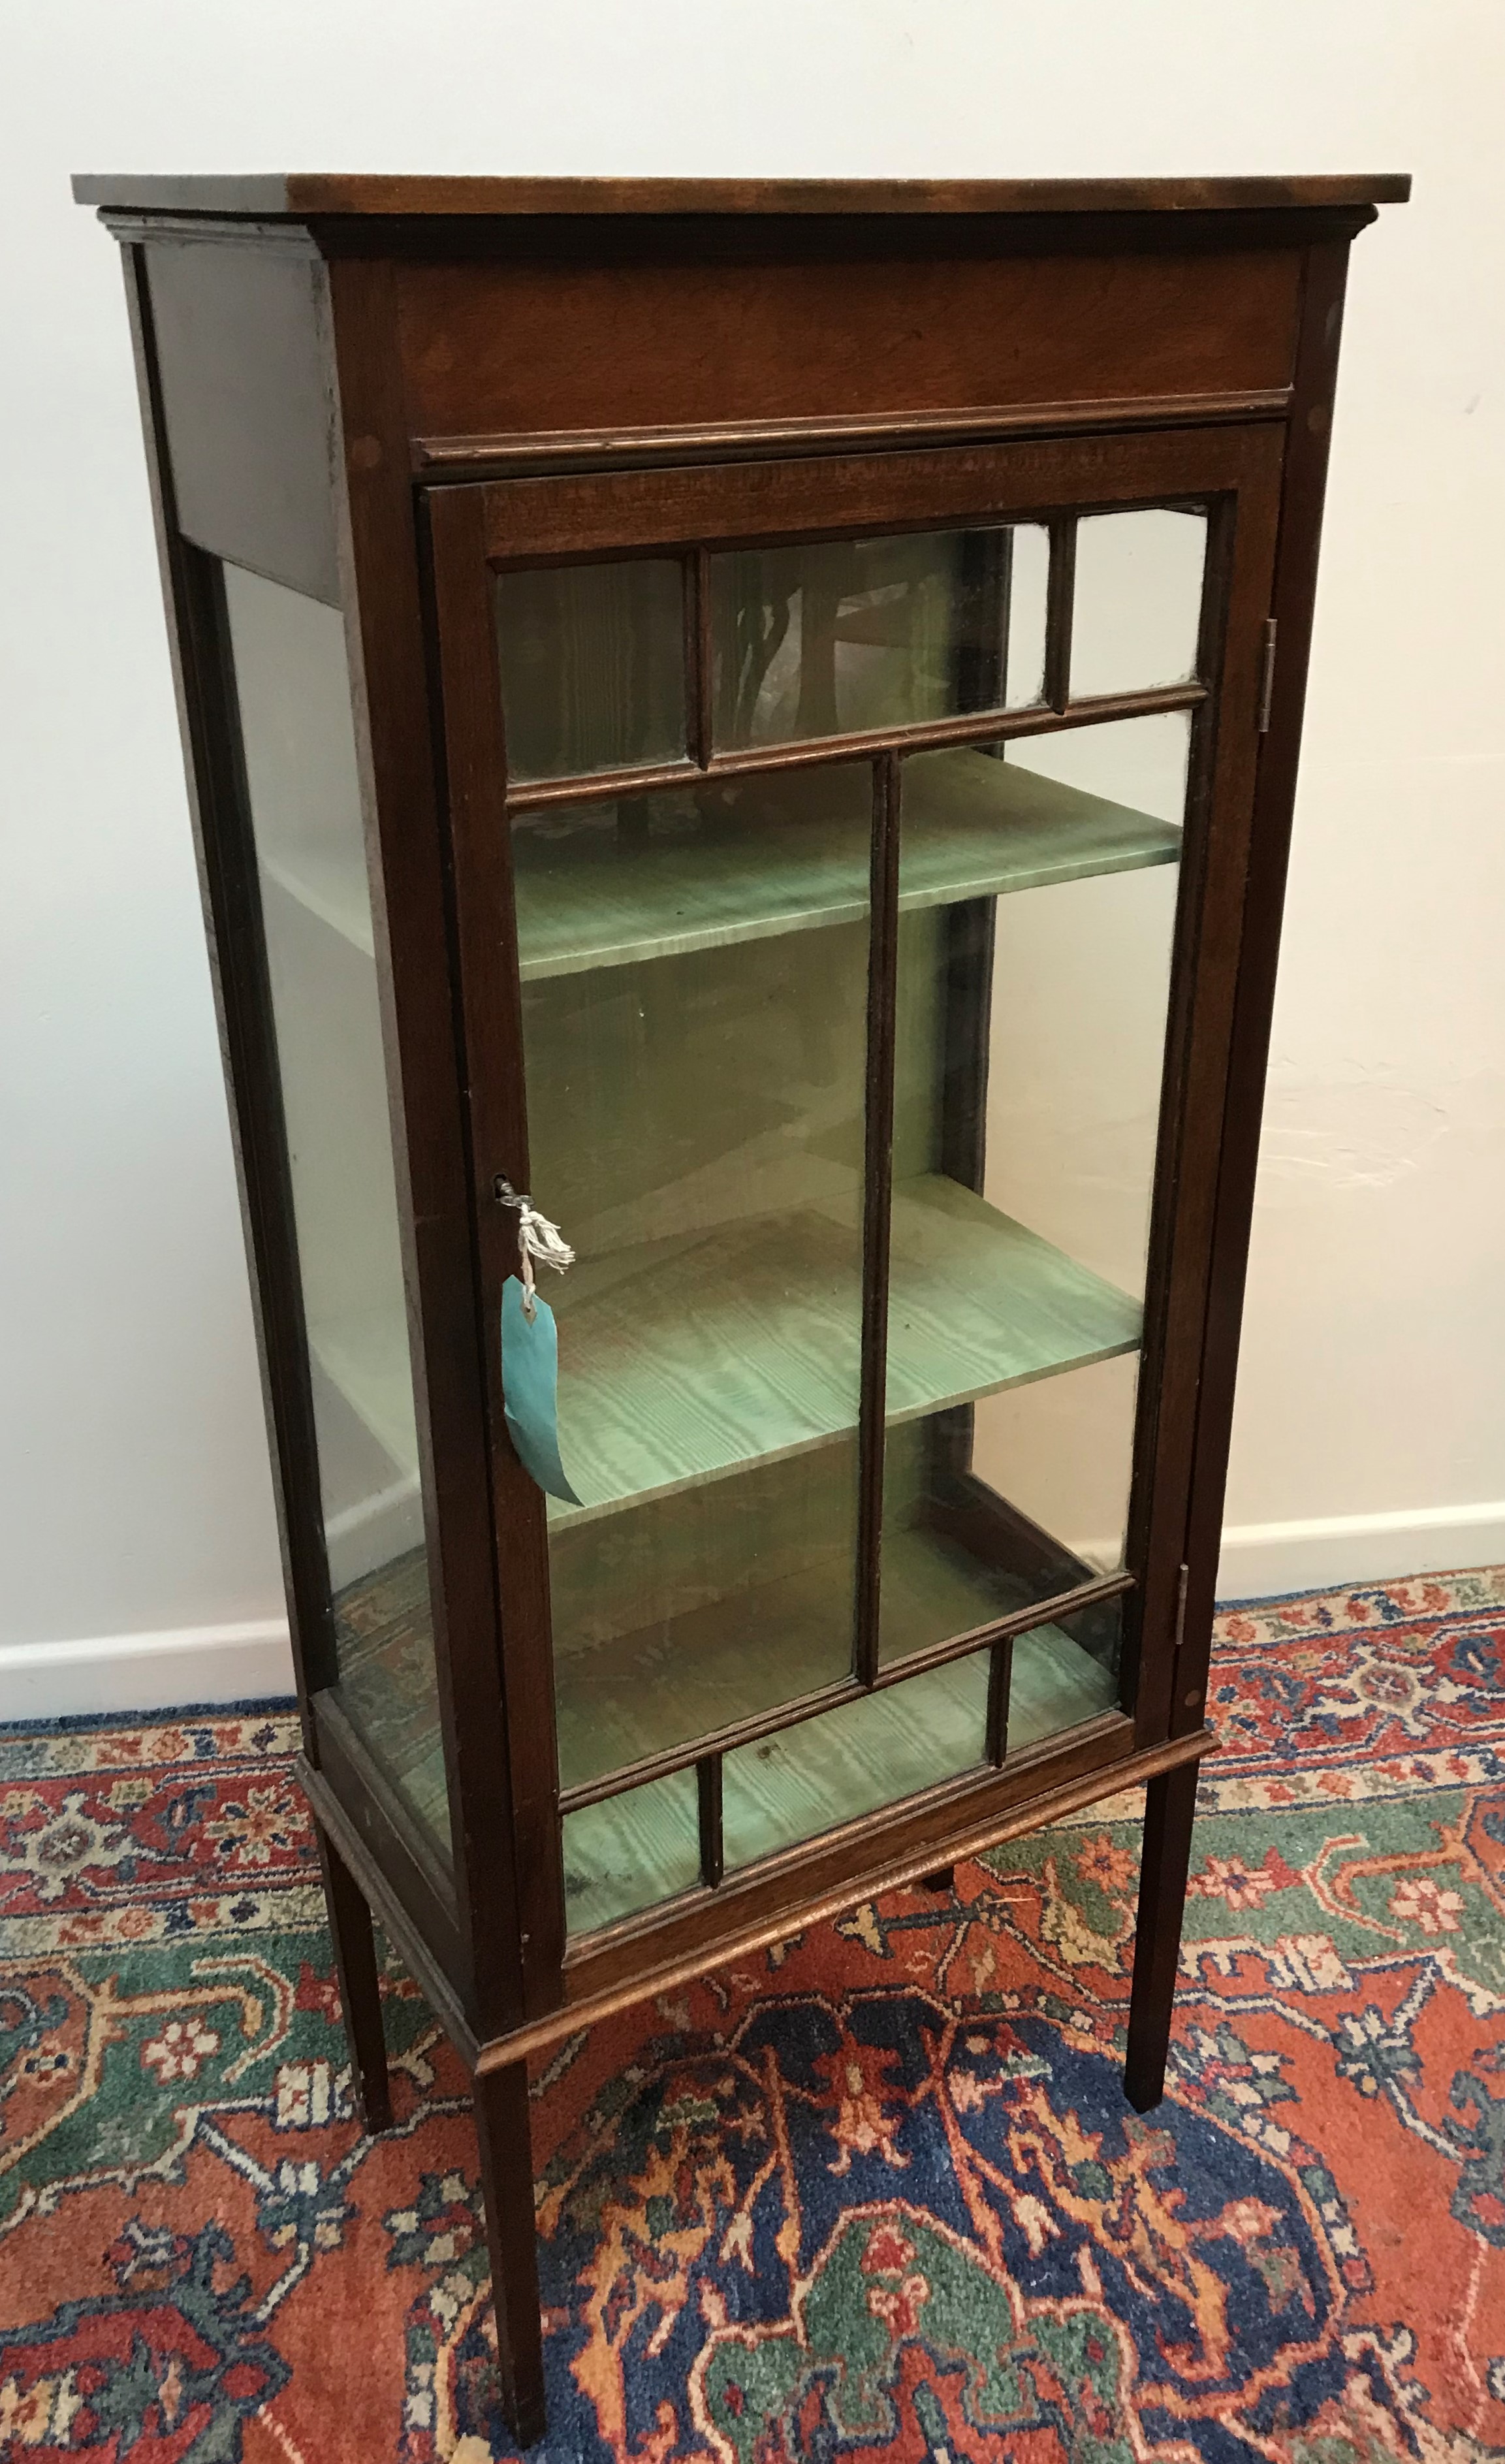 An Edwardian mahogany display cabinet with simulated marquetry inlaid decorated frieze over a